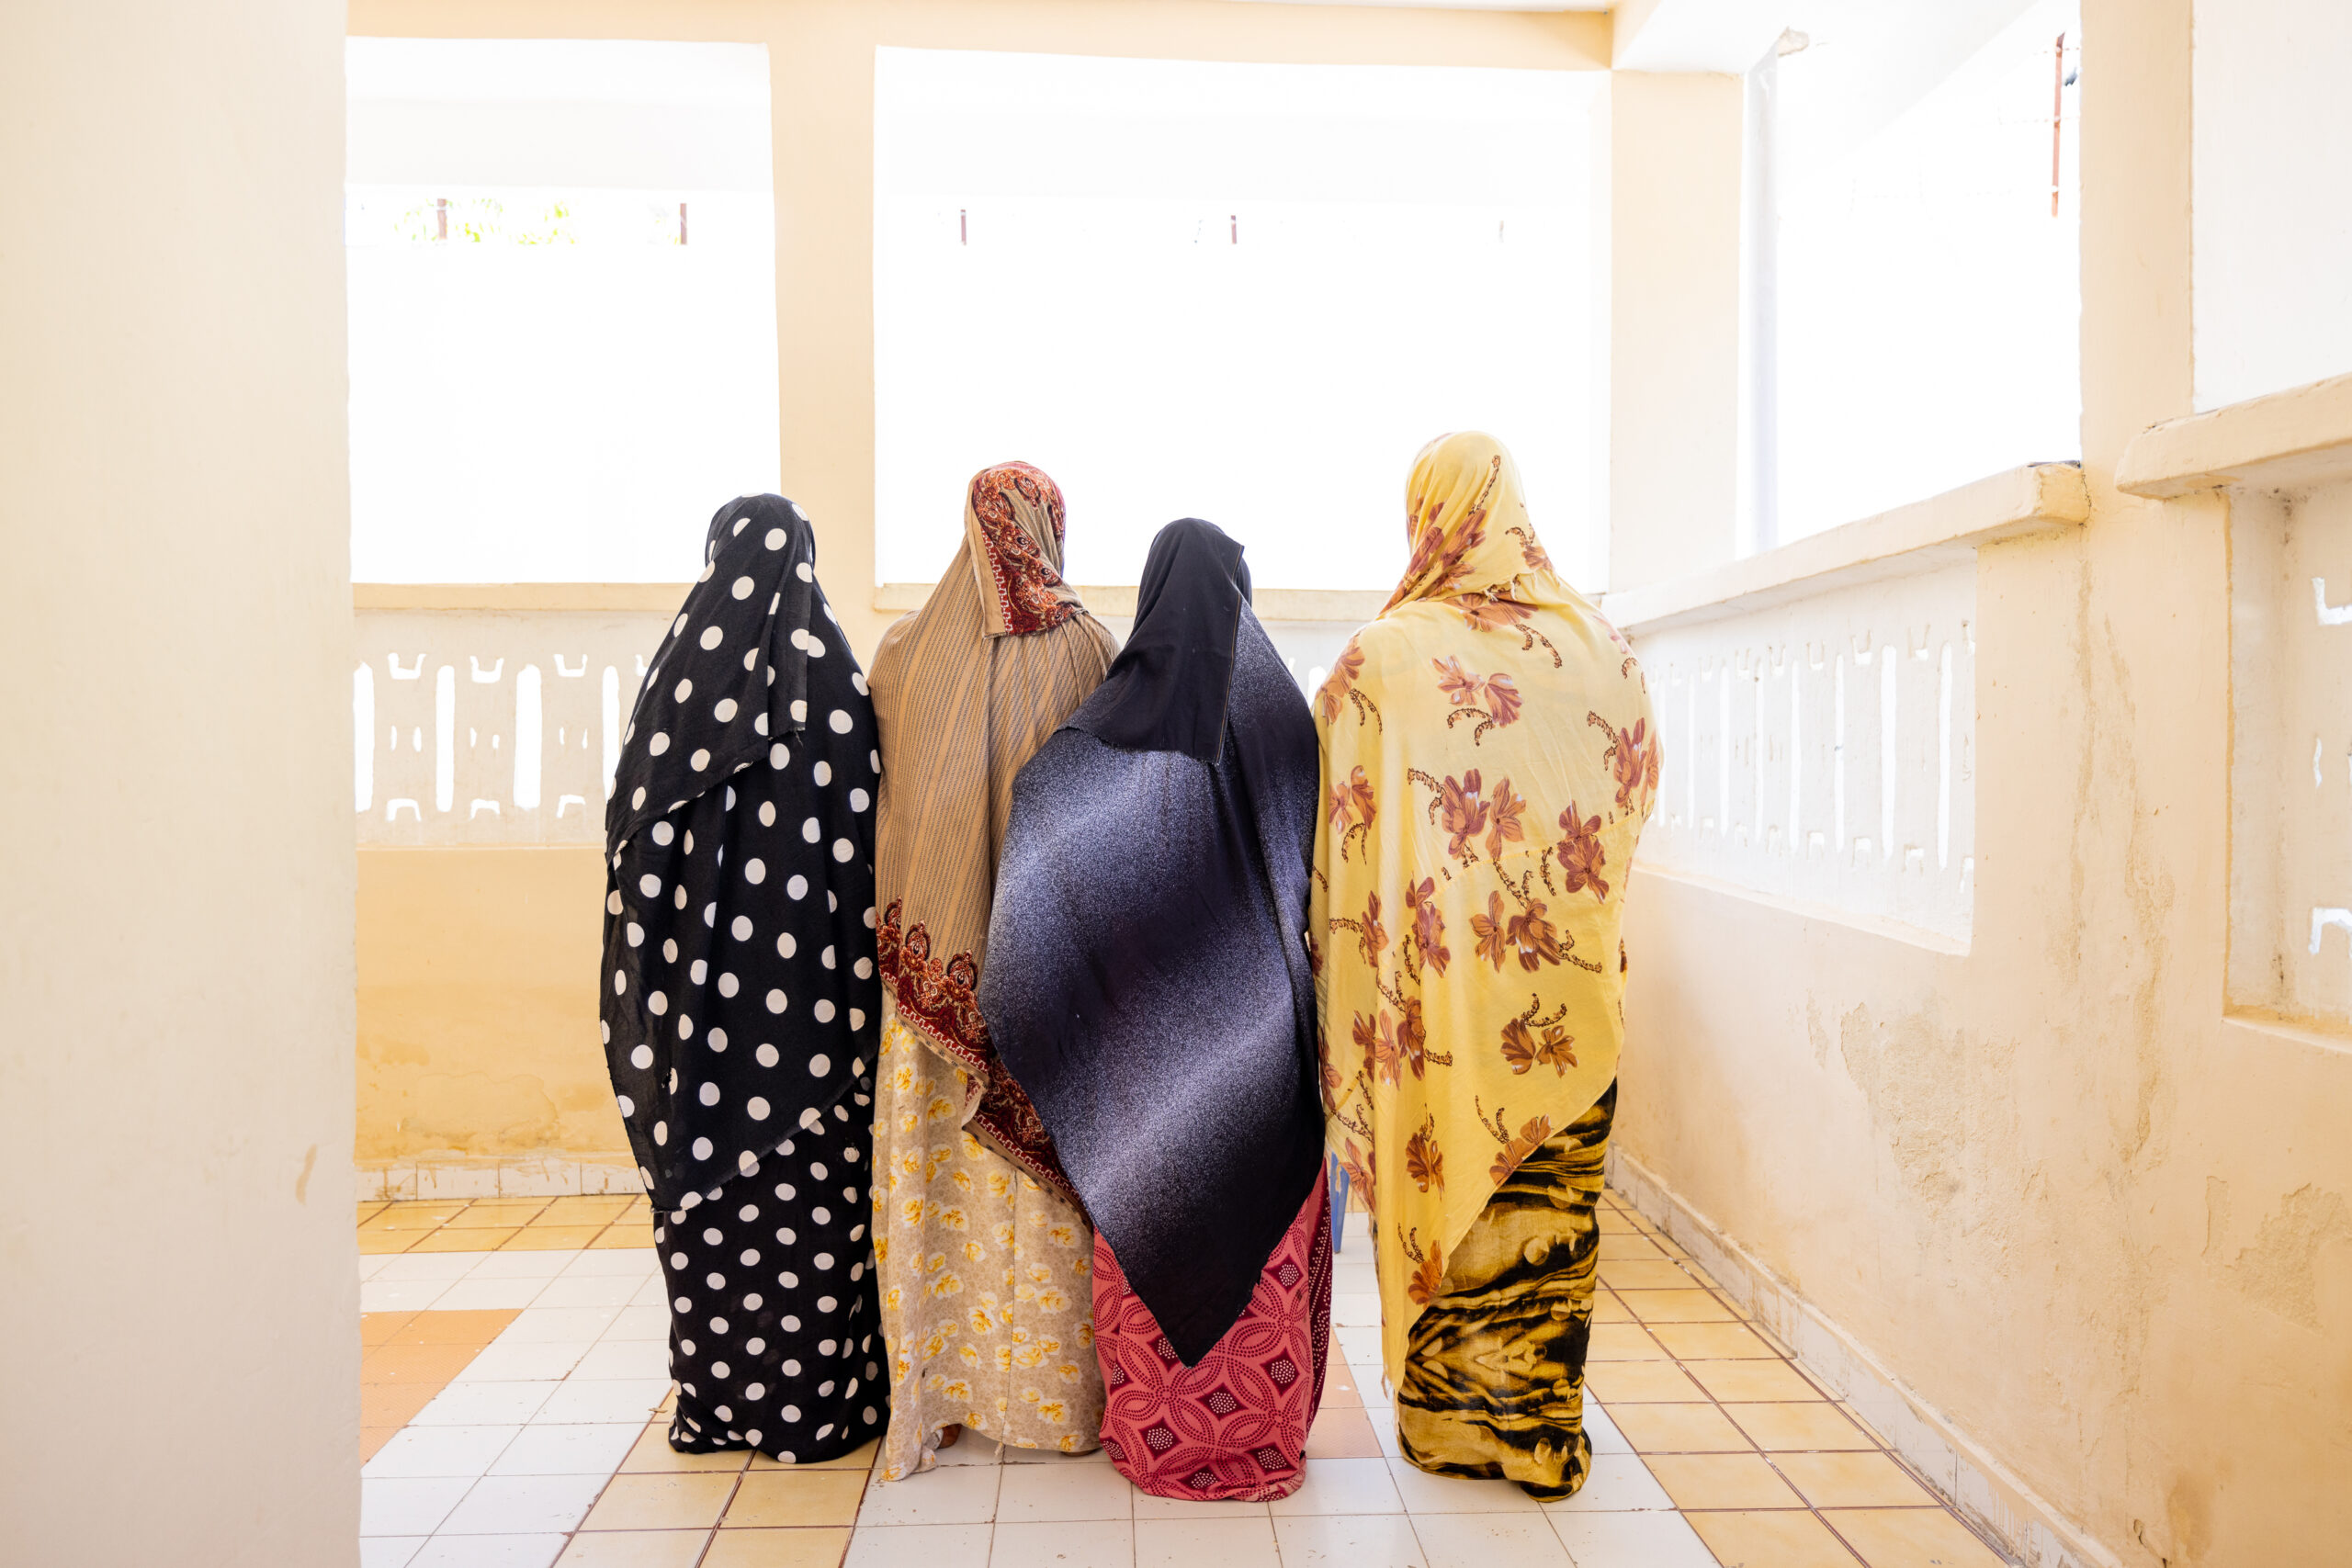 Stories from the Somalia Safe House